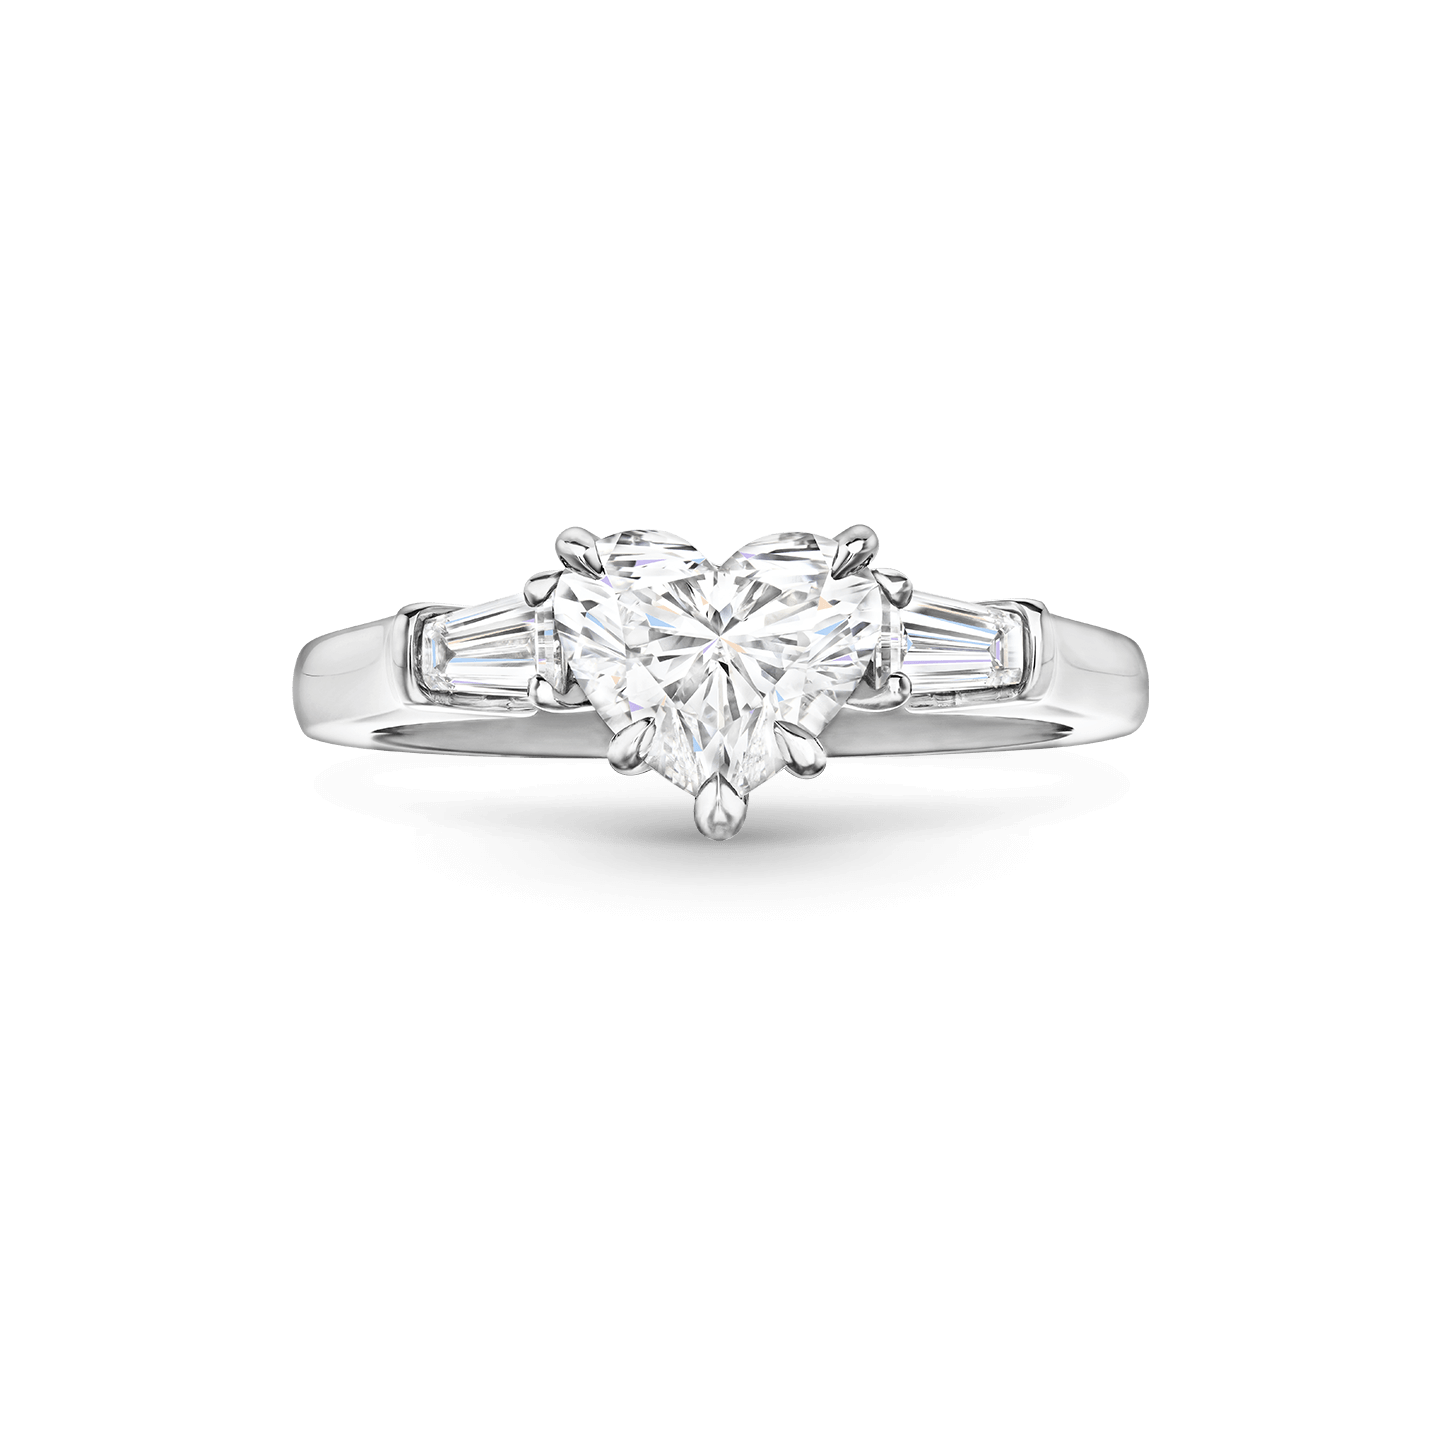 Front view of the Classic Winston Heart-Shaped Engagement Ring with Tapered Baguette Side Stones